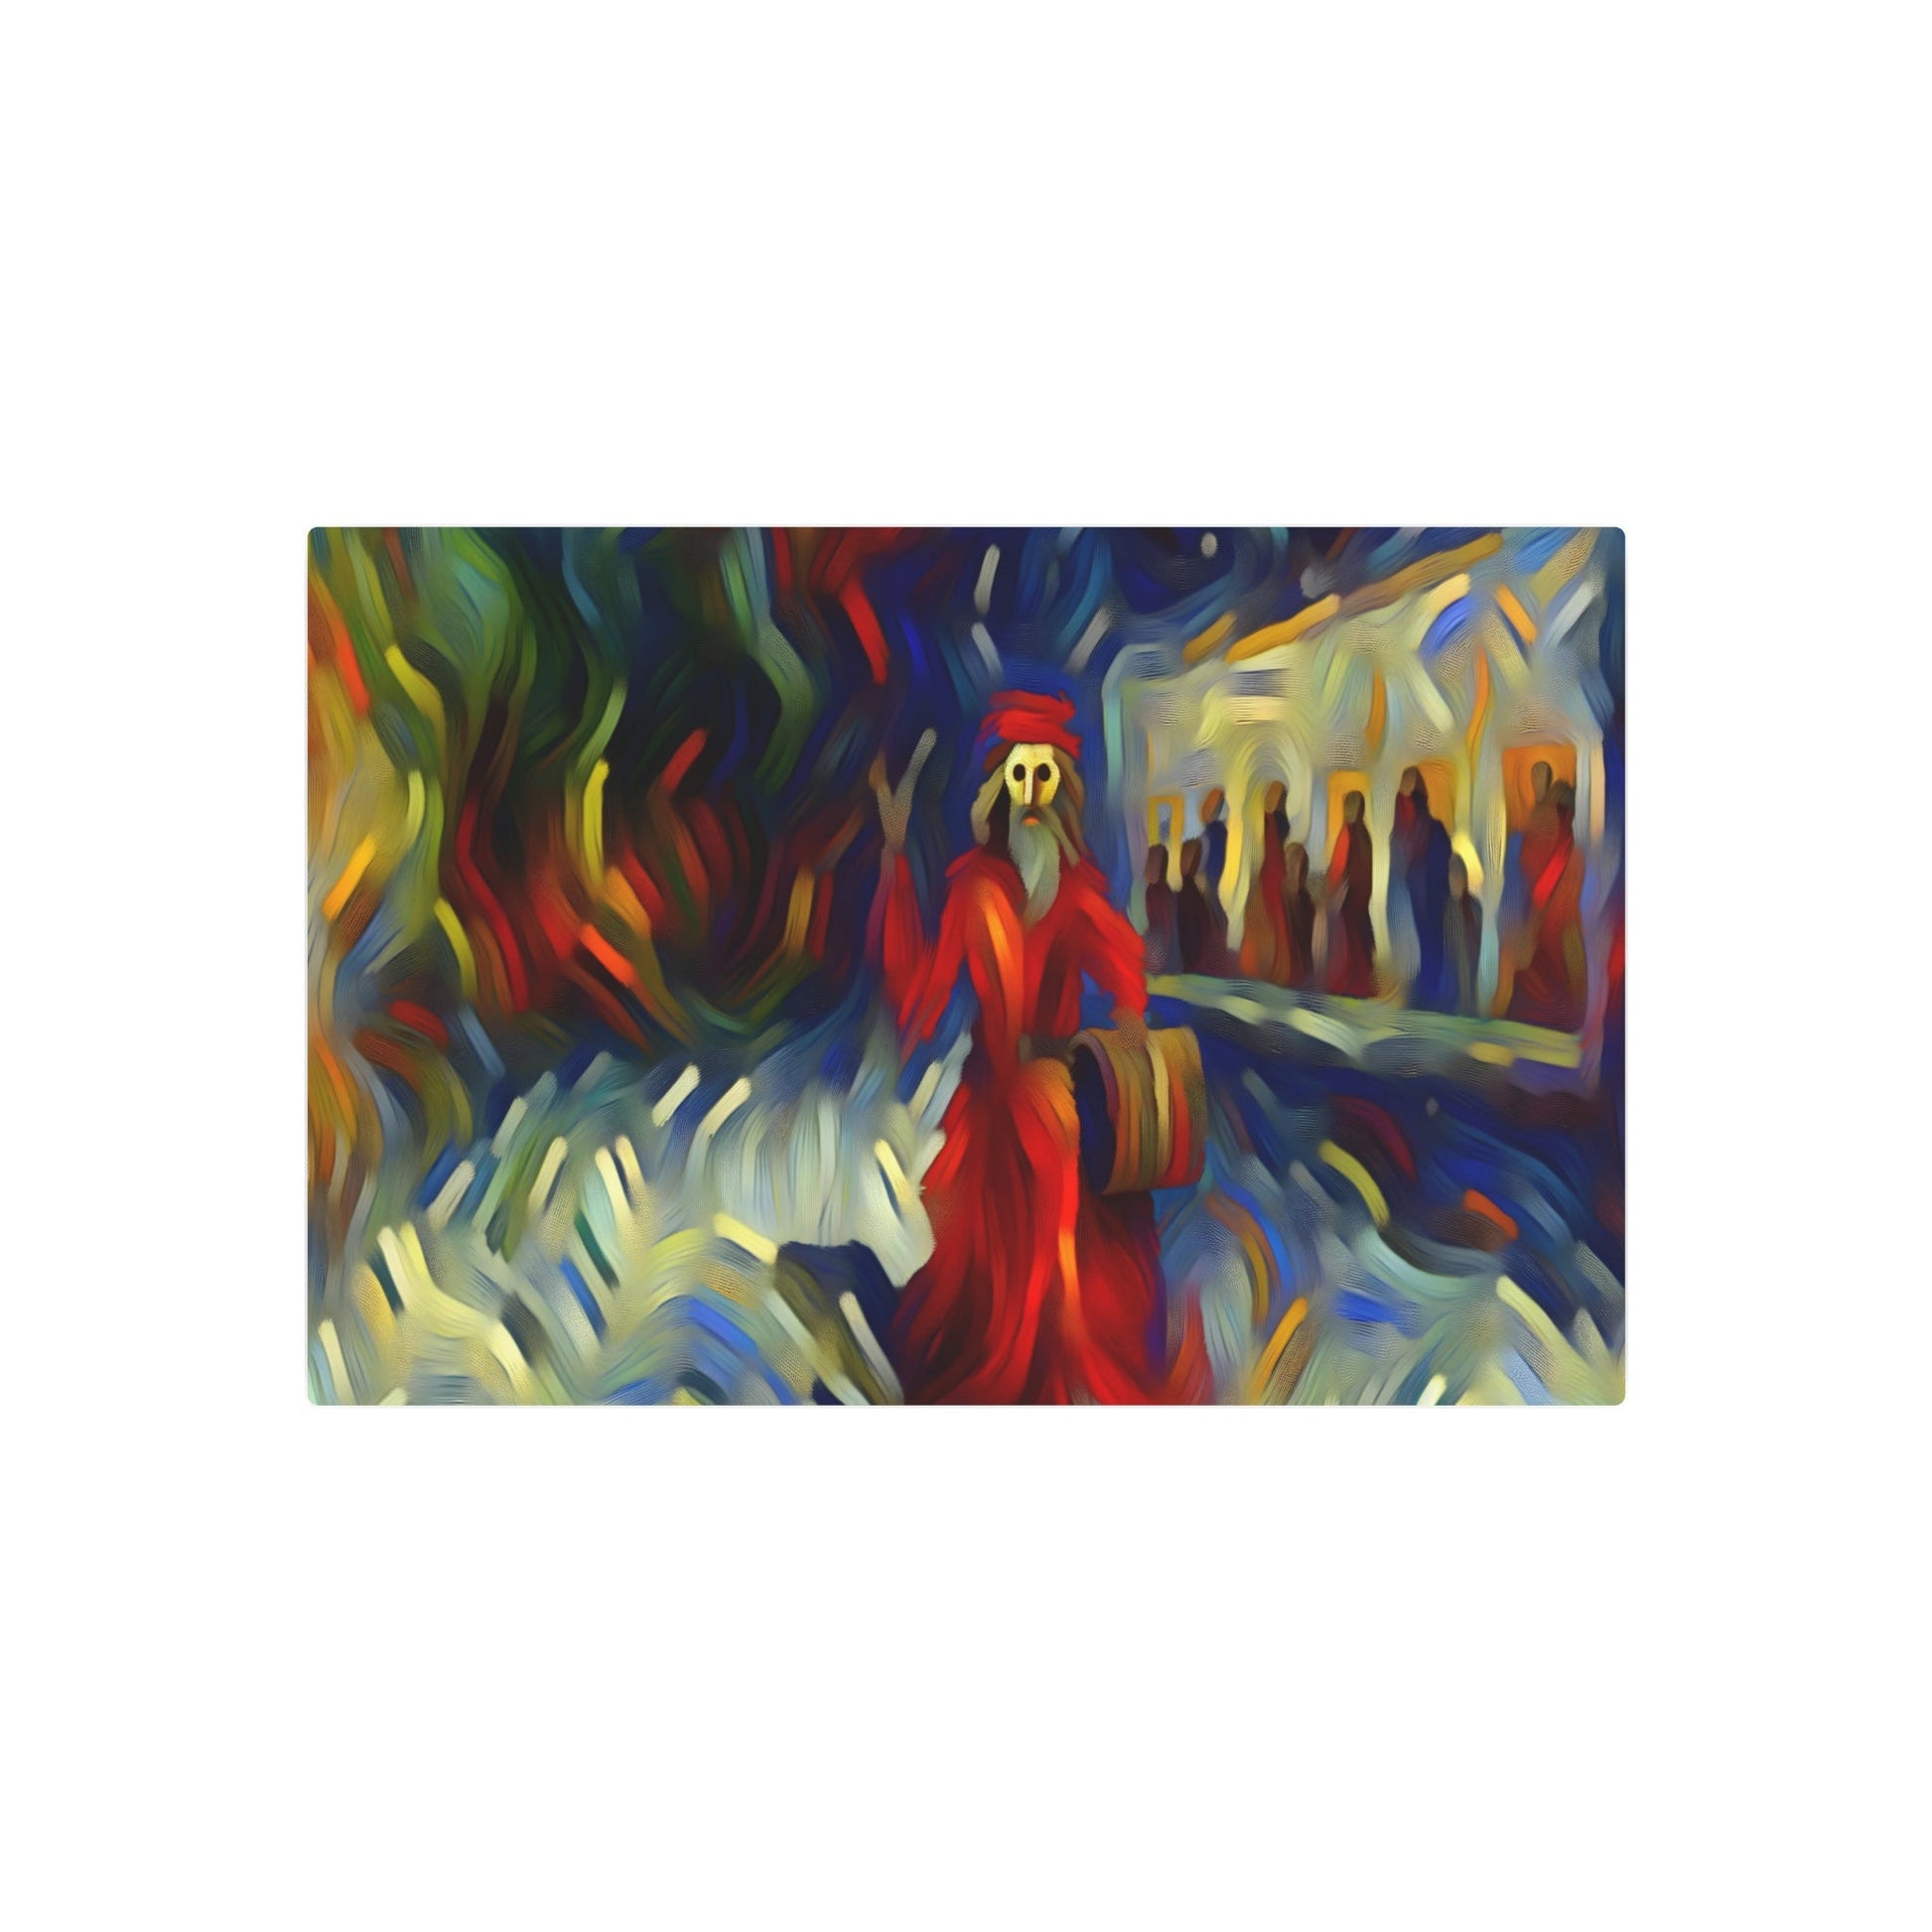 Metal Poster Art | "Expressionism Western Art - Bold and Dramatic Vivid Abstract Scene with Isolated Figure in Chaotic Landscape, Intense Emotional Style" - Metal Poster Art 30″ x 20″ (Horizontal) 0.12''